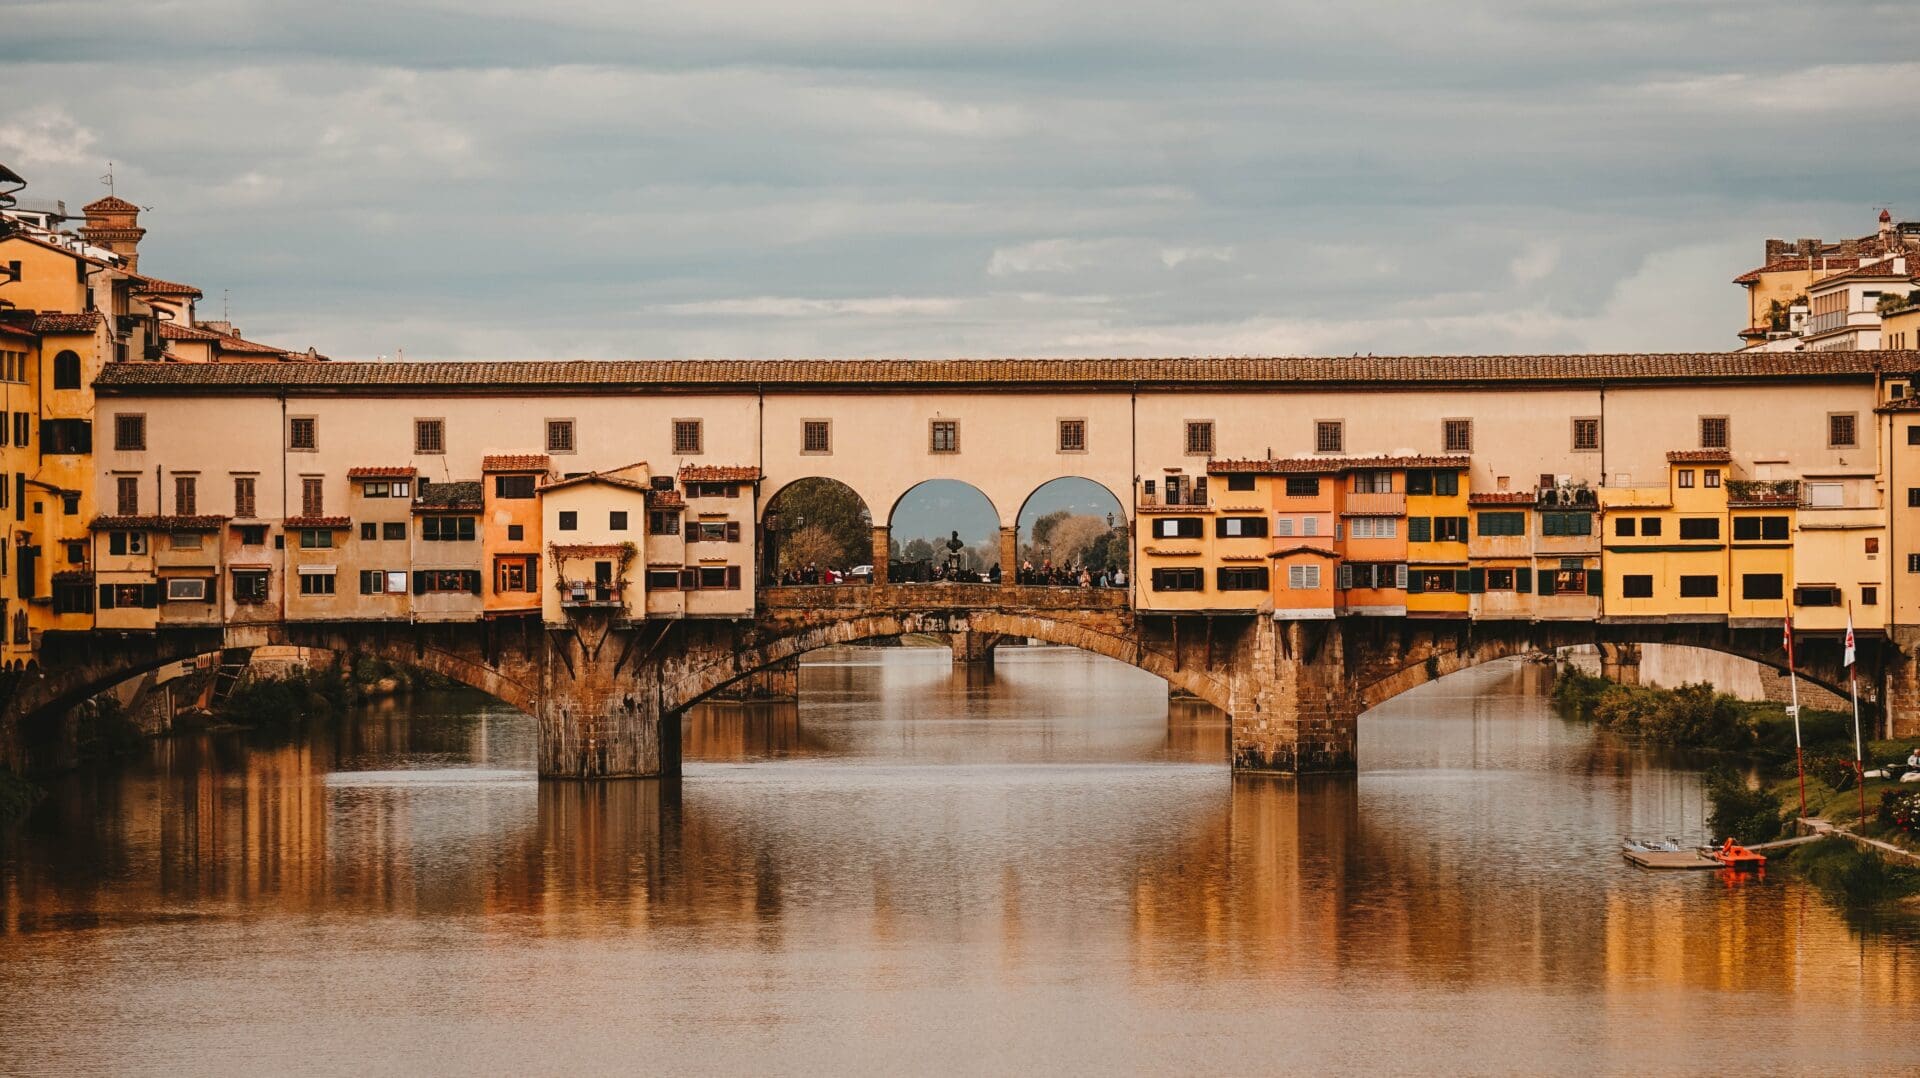 The best European cities for remote working | A view of the Ponte Vecchio in Florence at sunset.